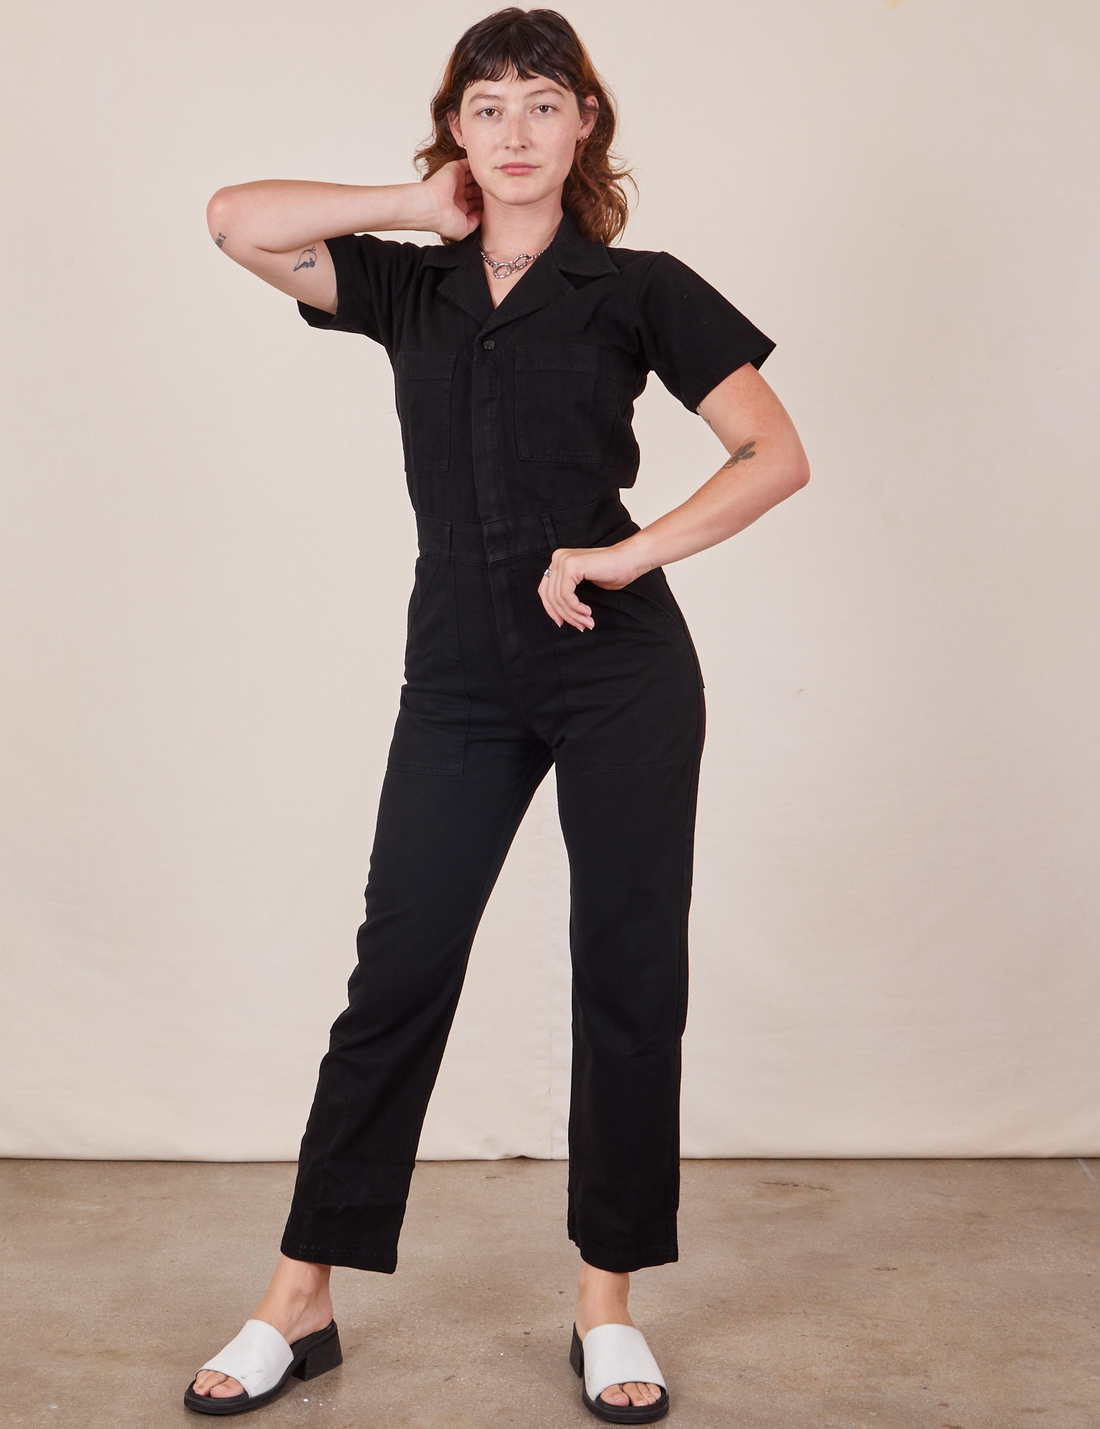 Alex is 5'8" and wearing XS Short Sleeve Jumpsuit in Basic Black